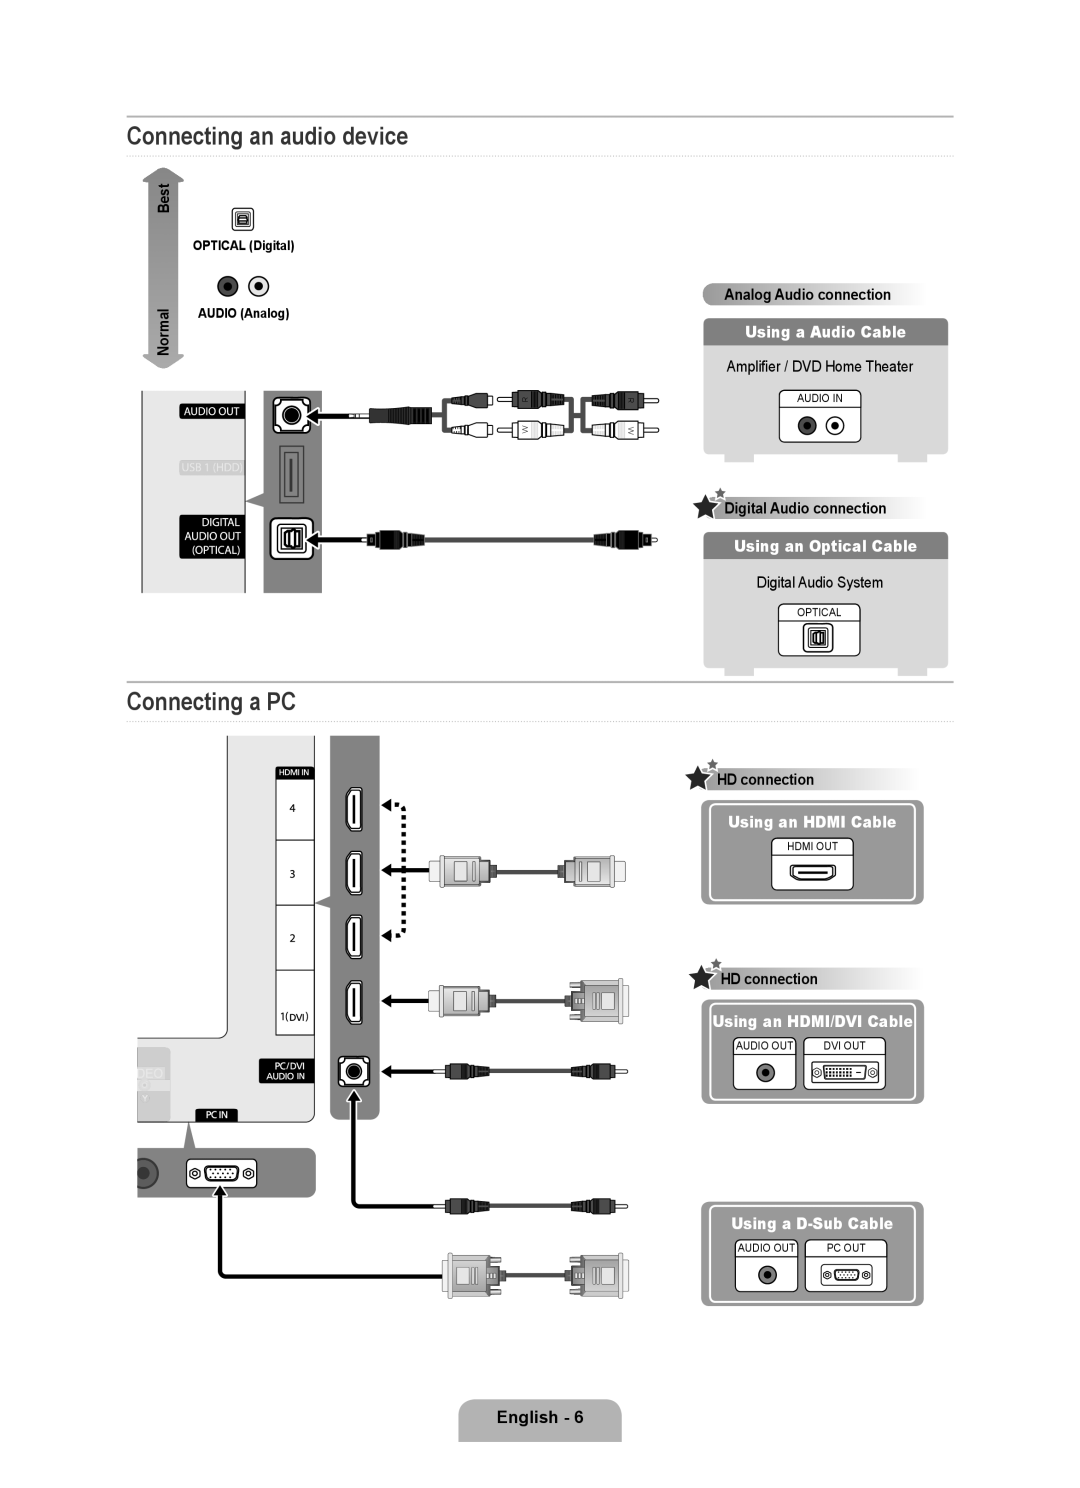 Samsung 7000 Connecting an audio device, Connecting a PC, Analog Audio connection, Using a Audio Cable, English, Best 